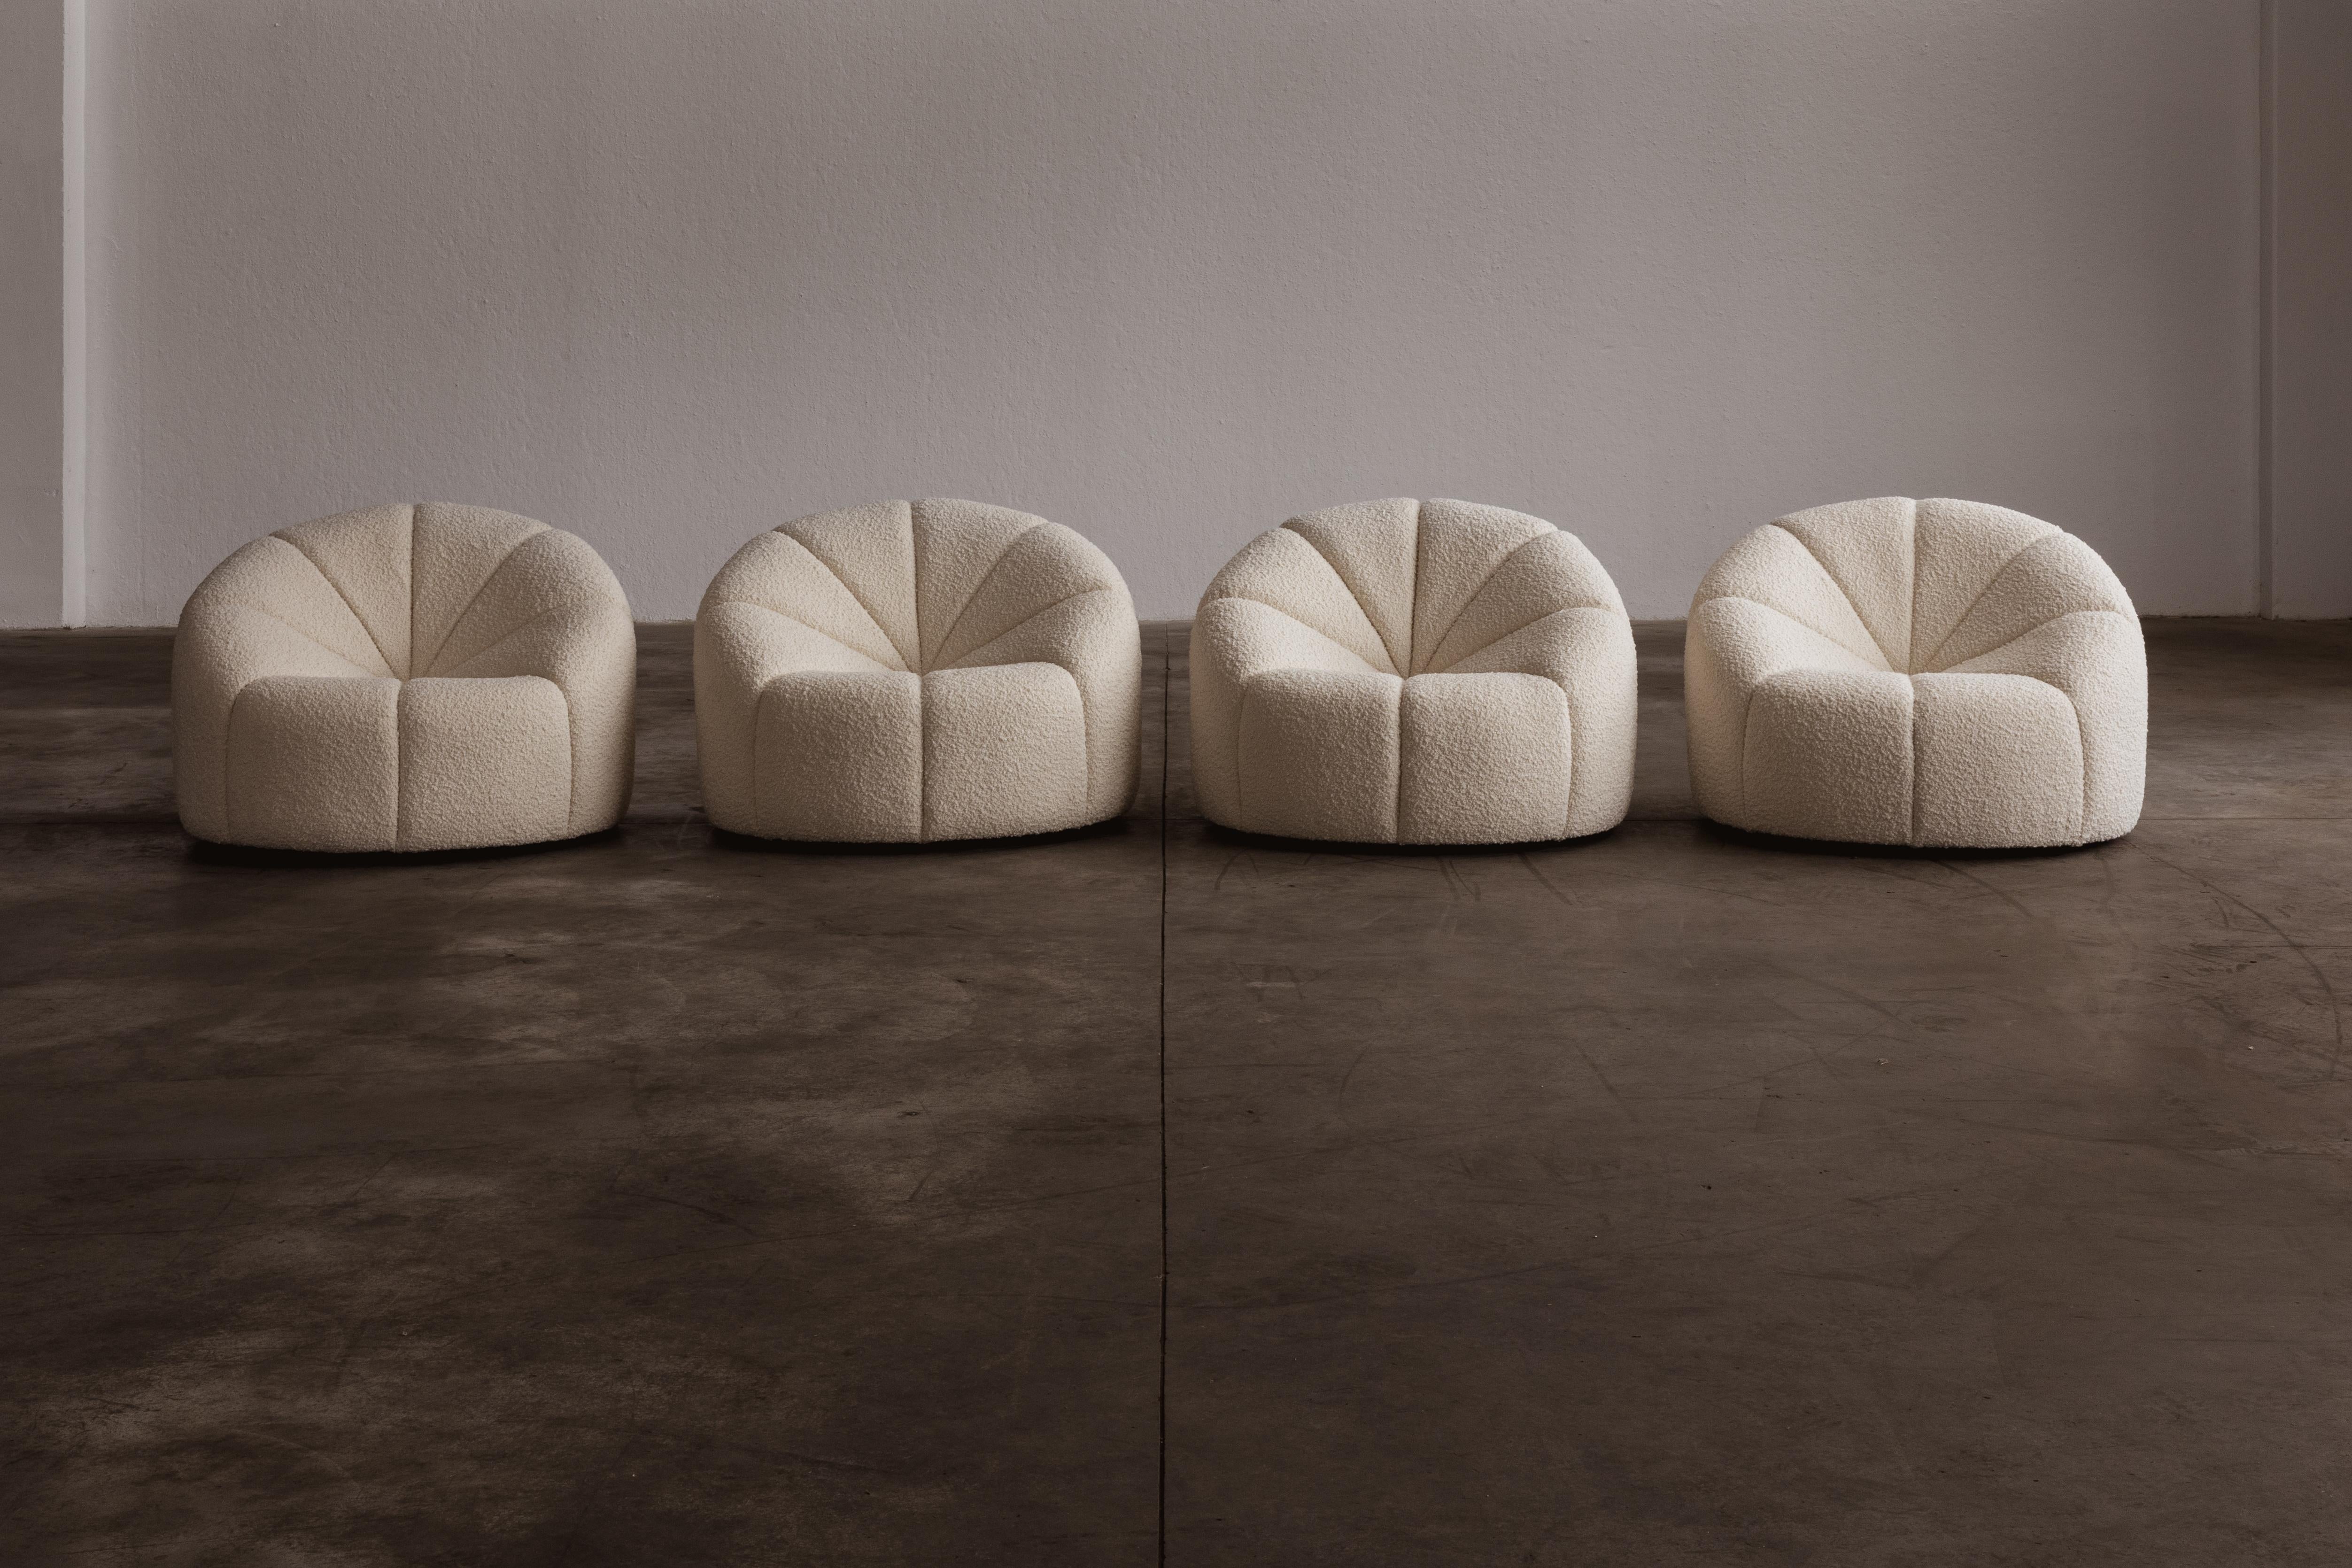 Pierre Paulin “Elysée” armchairs, wool bouclé and foam, France, designed in 1972, set of four.

Commissioned in the 1970s by French President Pompidou to fit out a series of reception rooms in the Elysée Palace, Paulin brought modernity to the